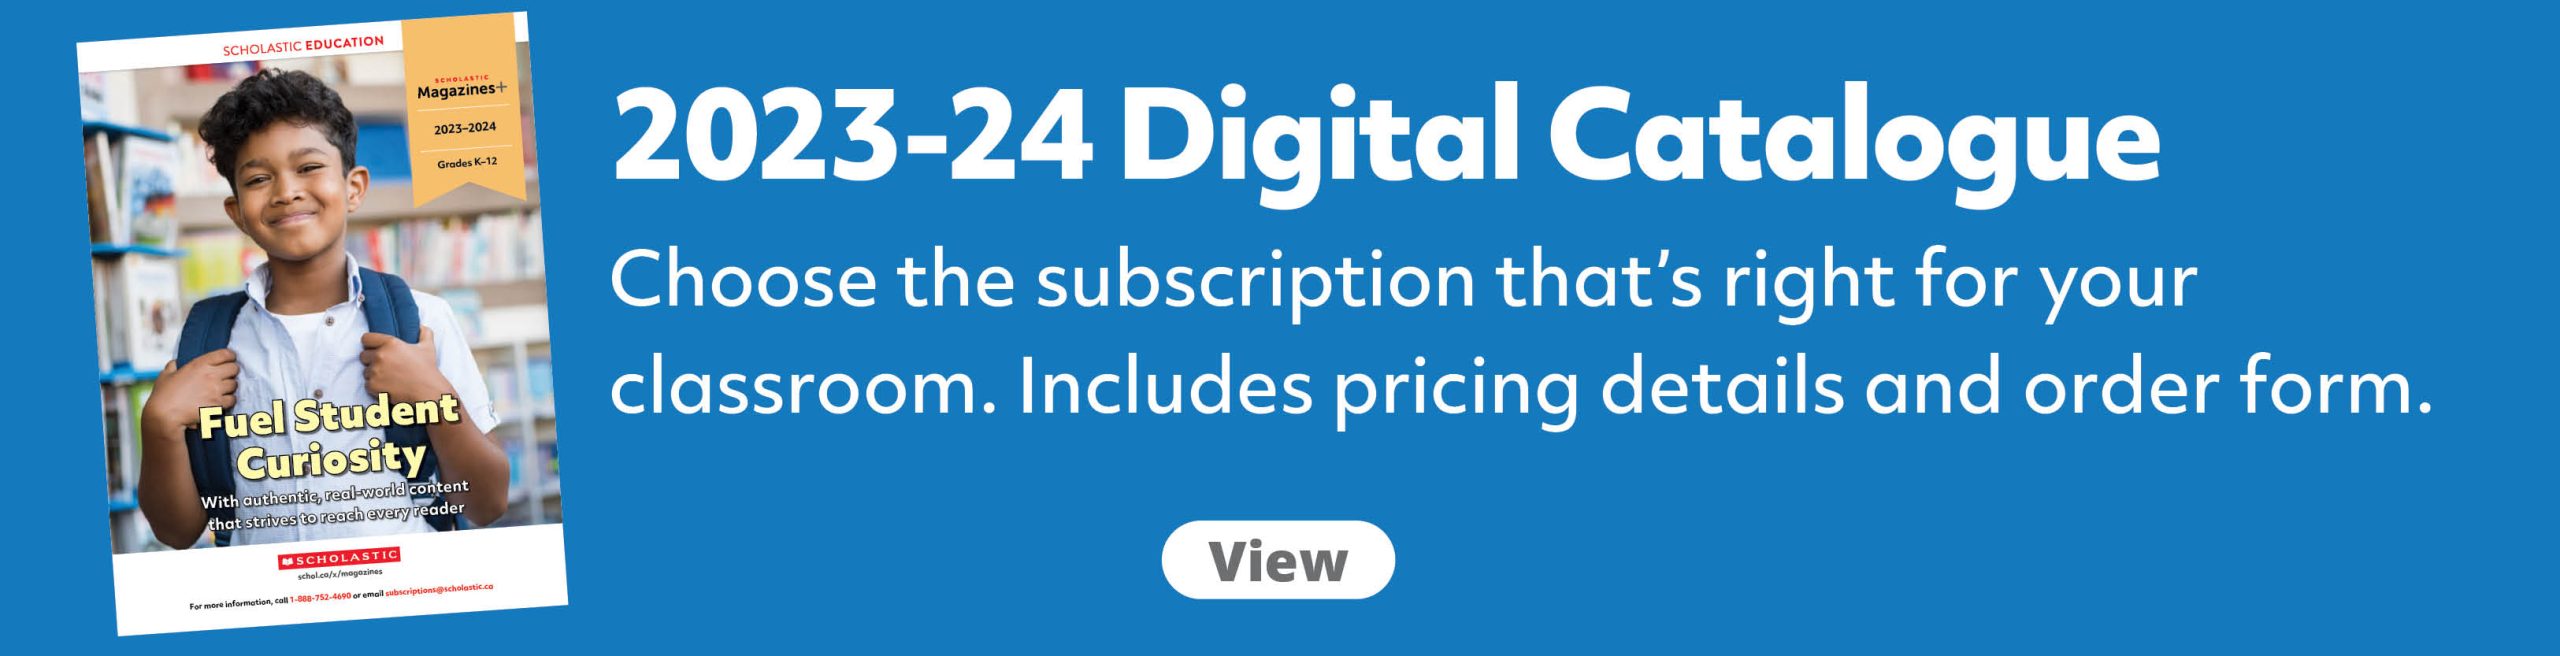 Choose the subscription that's right for your classroom. Includes pricing details and order form.